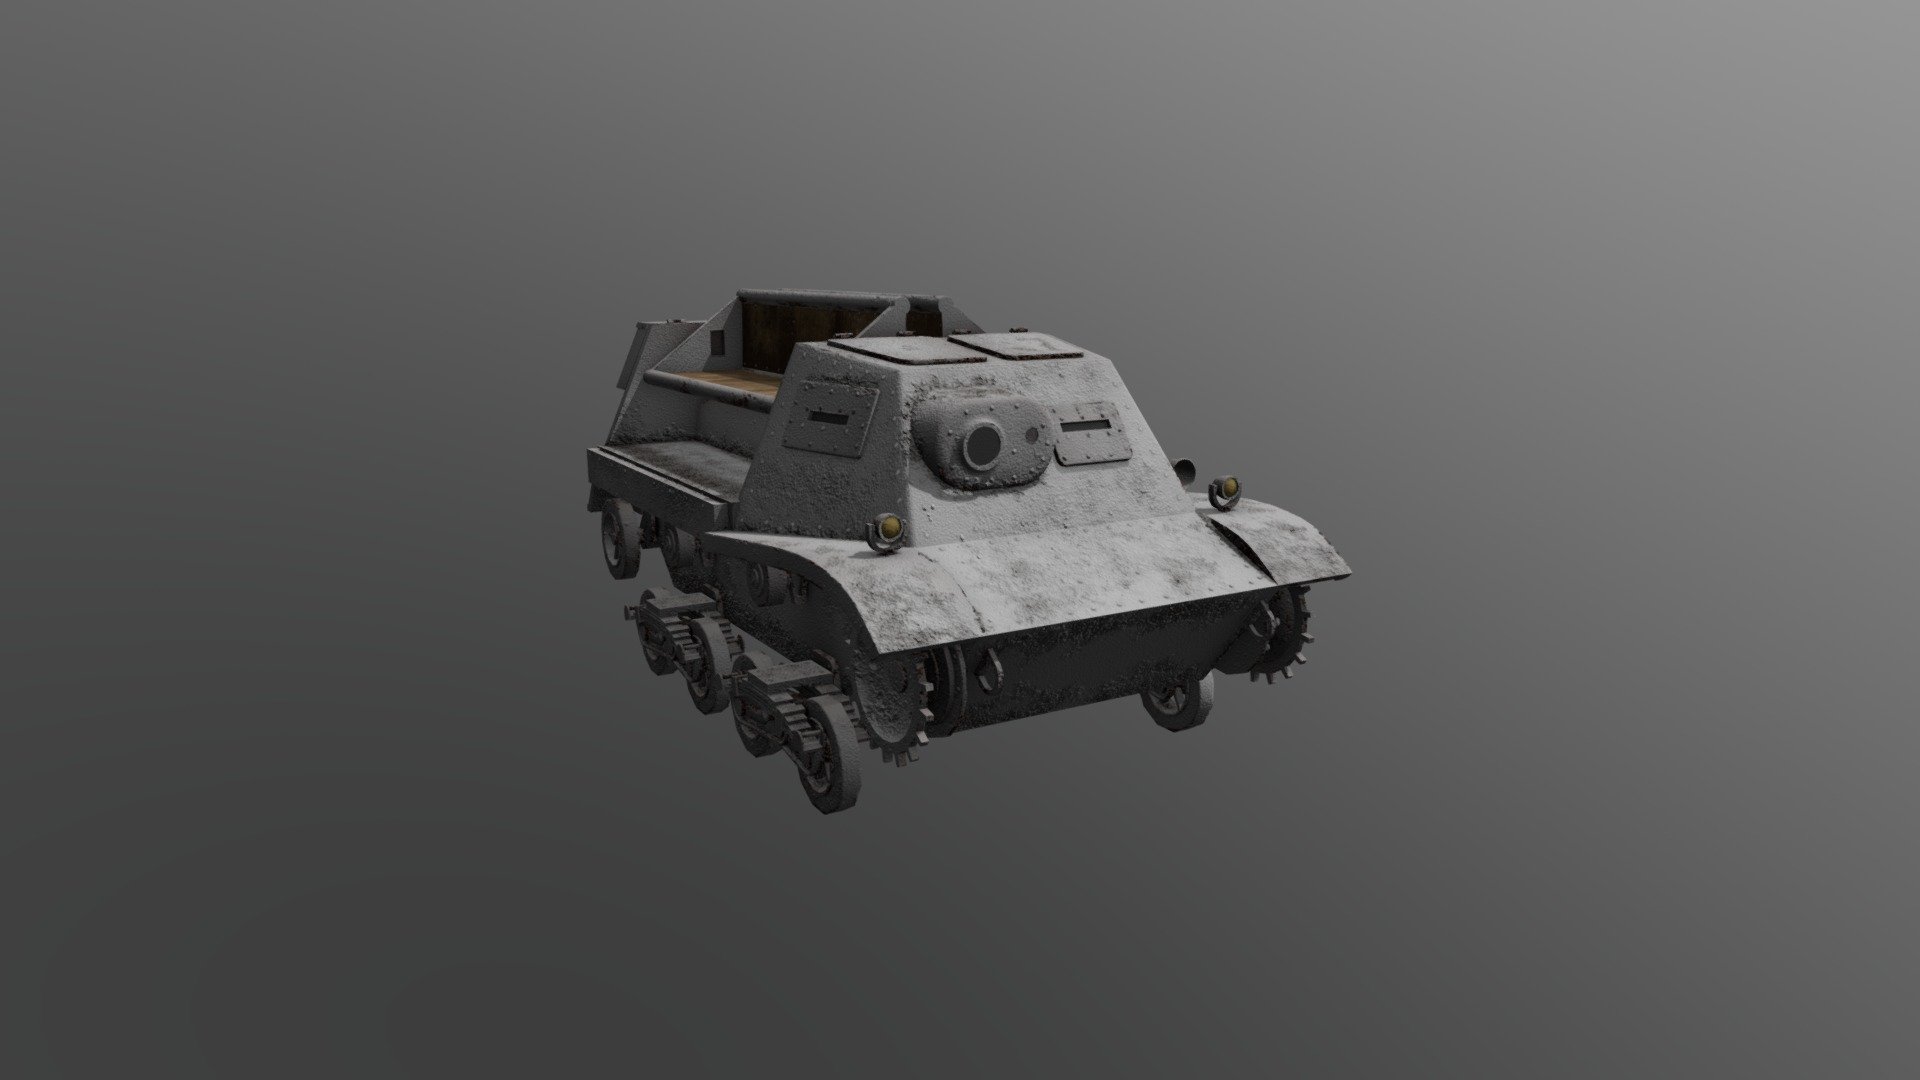 A vehicle I made for a mod, I did not create the highpoly for this model, I was provided one that I slightly modified and used to create a lower poly model according to the mod creators specs

Original mesh: http://www.cadnav.com/3d-models/model-10805.html - T20 Komsomolets - 3D model by FrozenOne 3d model